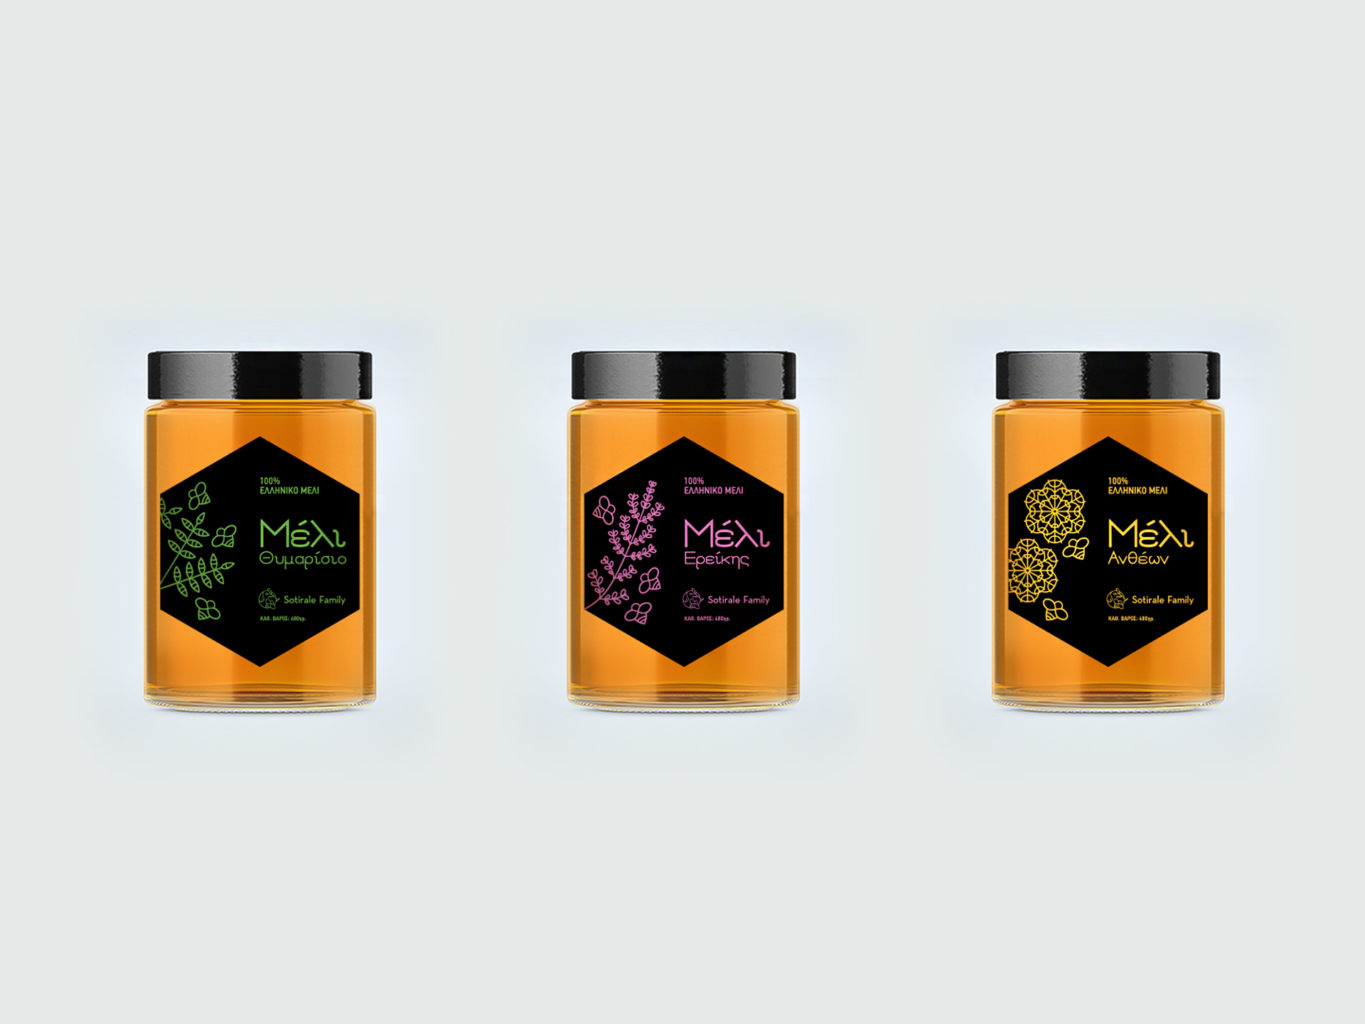 Sotirale Family honey packaging